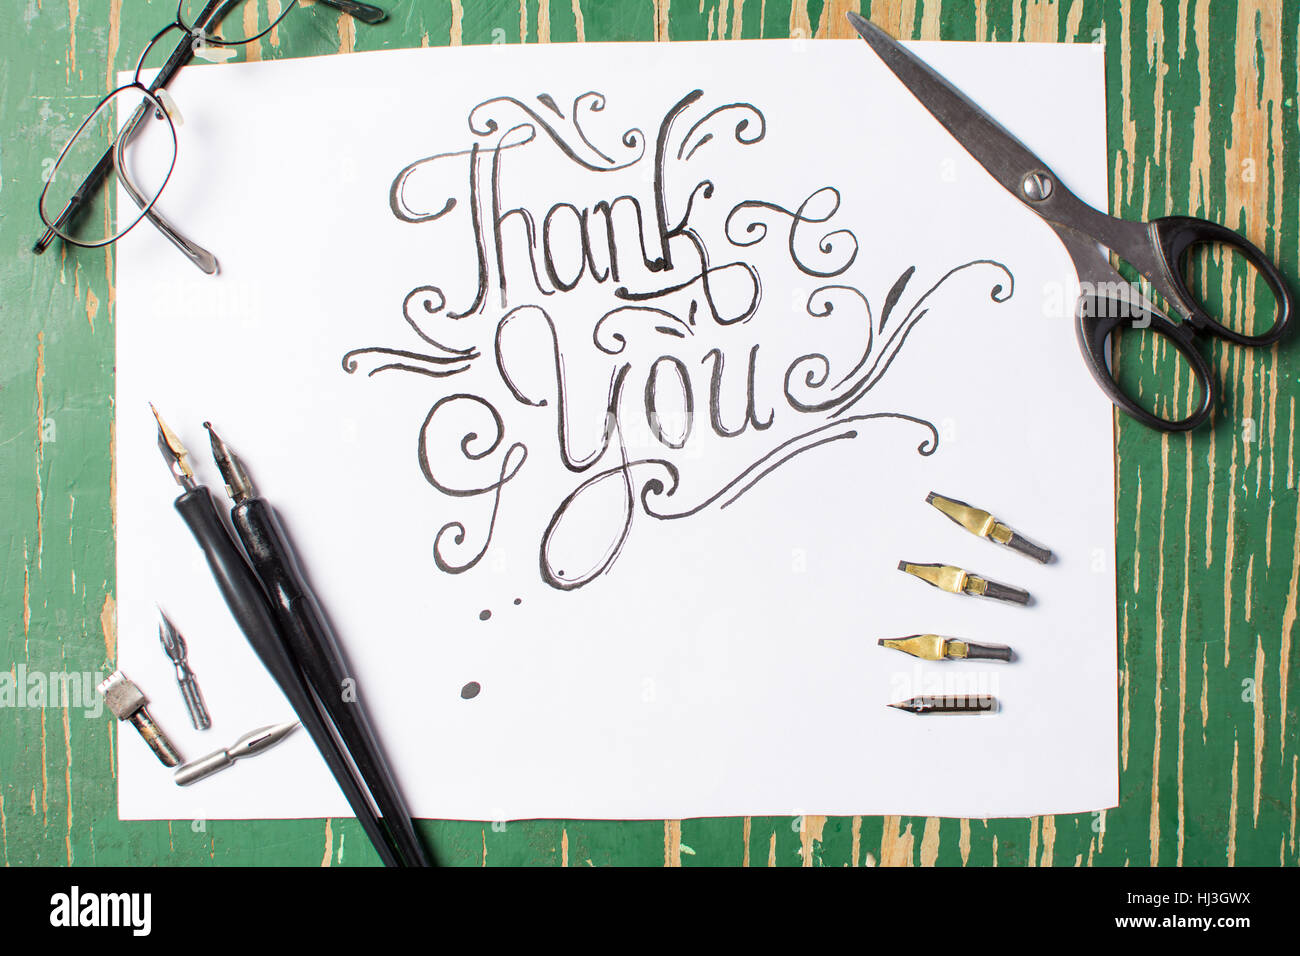 Thank you note calligraphy with writing equipment on the table Stock Photo